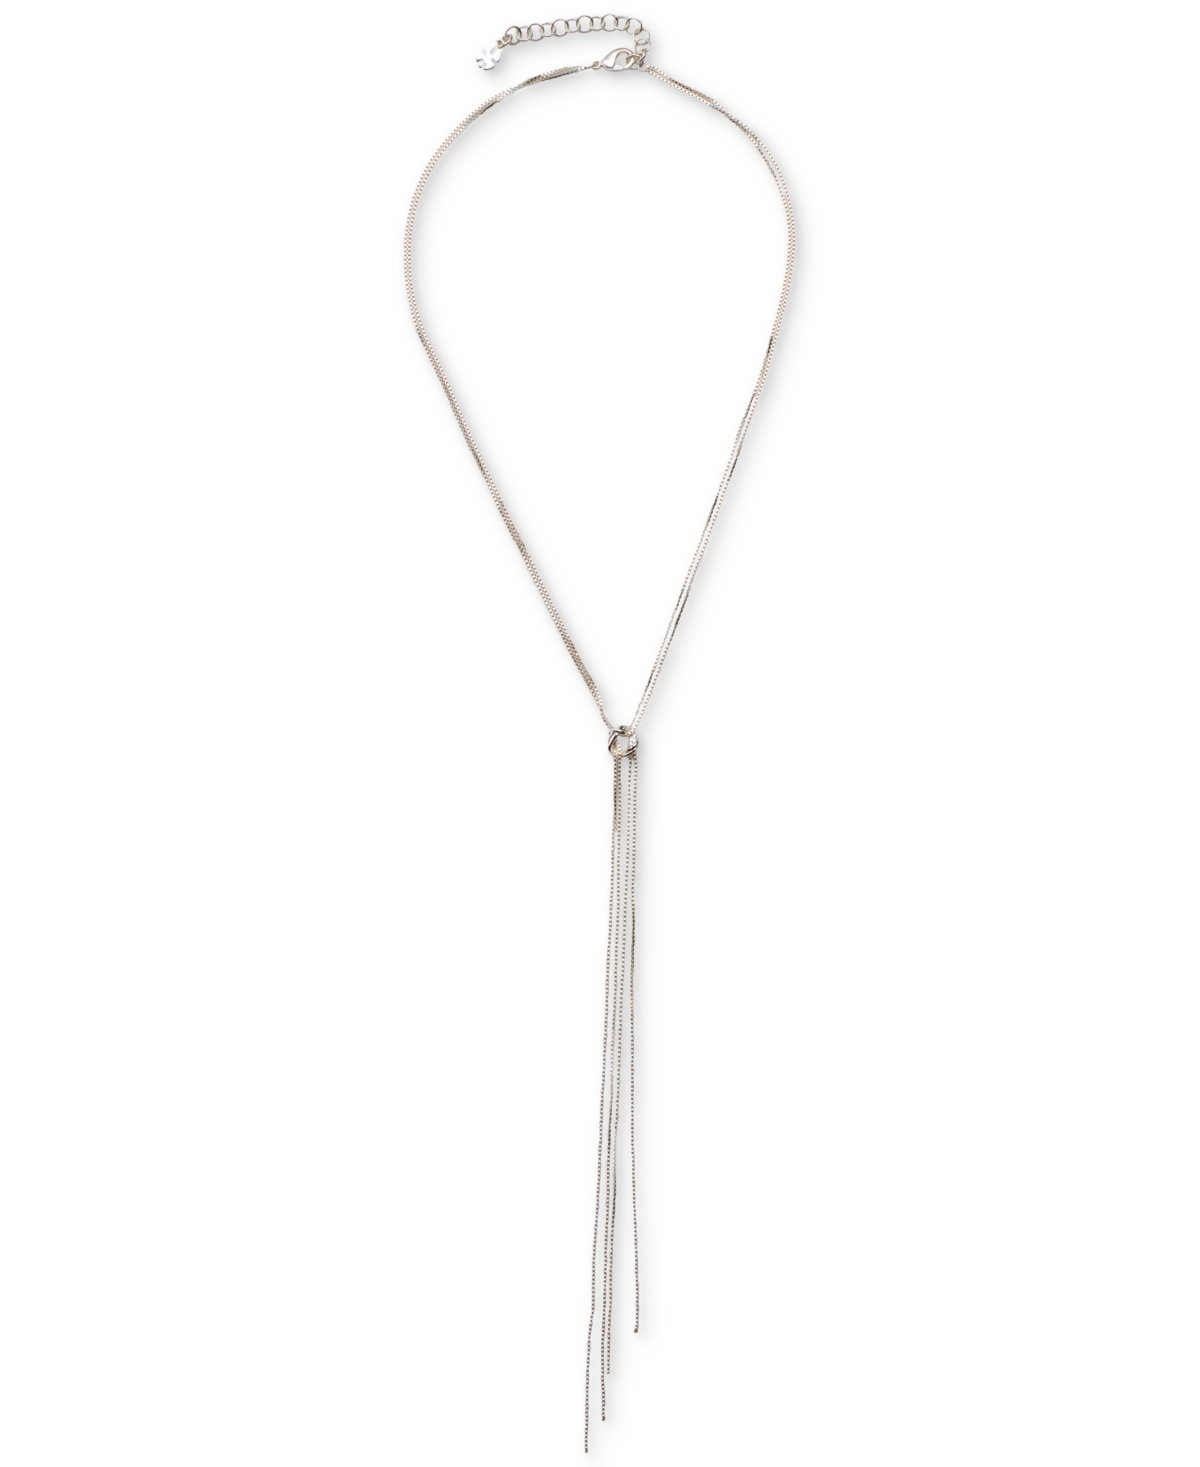 Shop Lucky Brand Silver-tone Knotted Lariat Necklace, 17" + 3" Extender